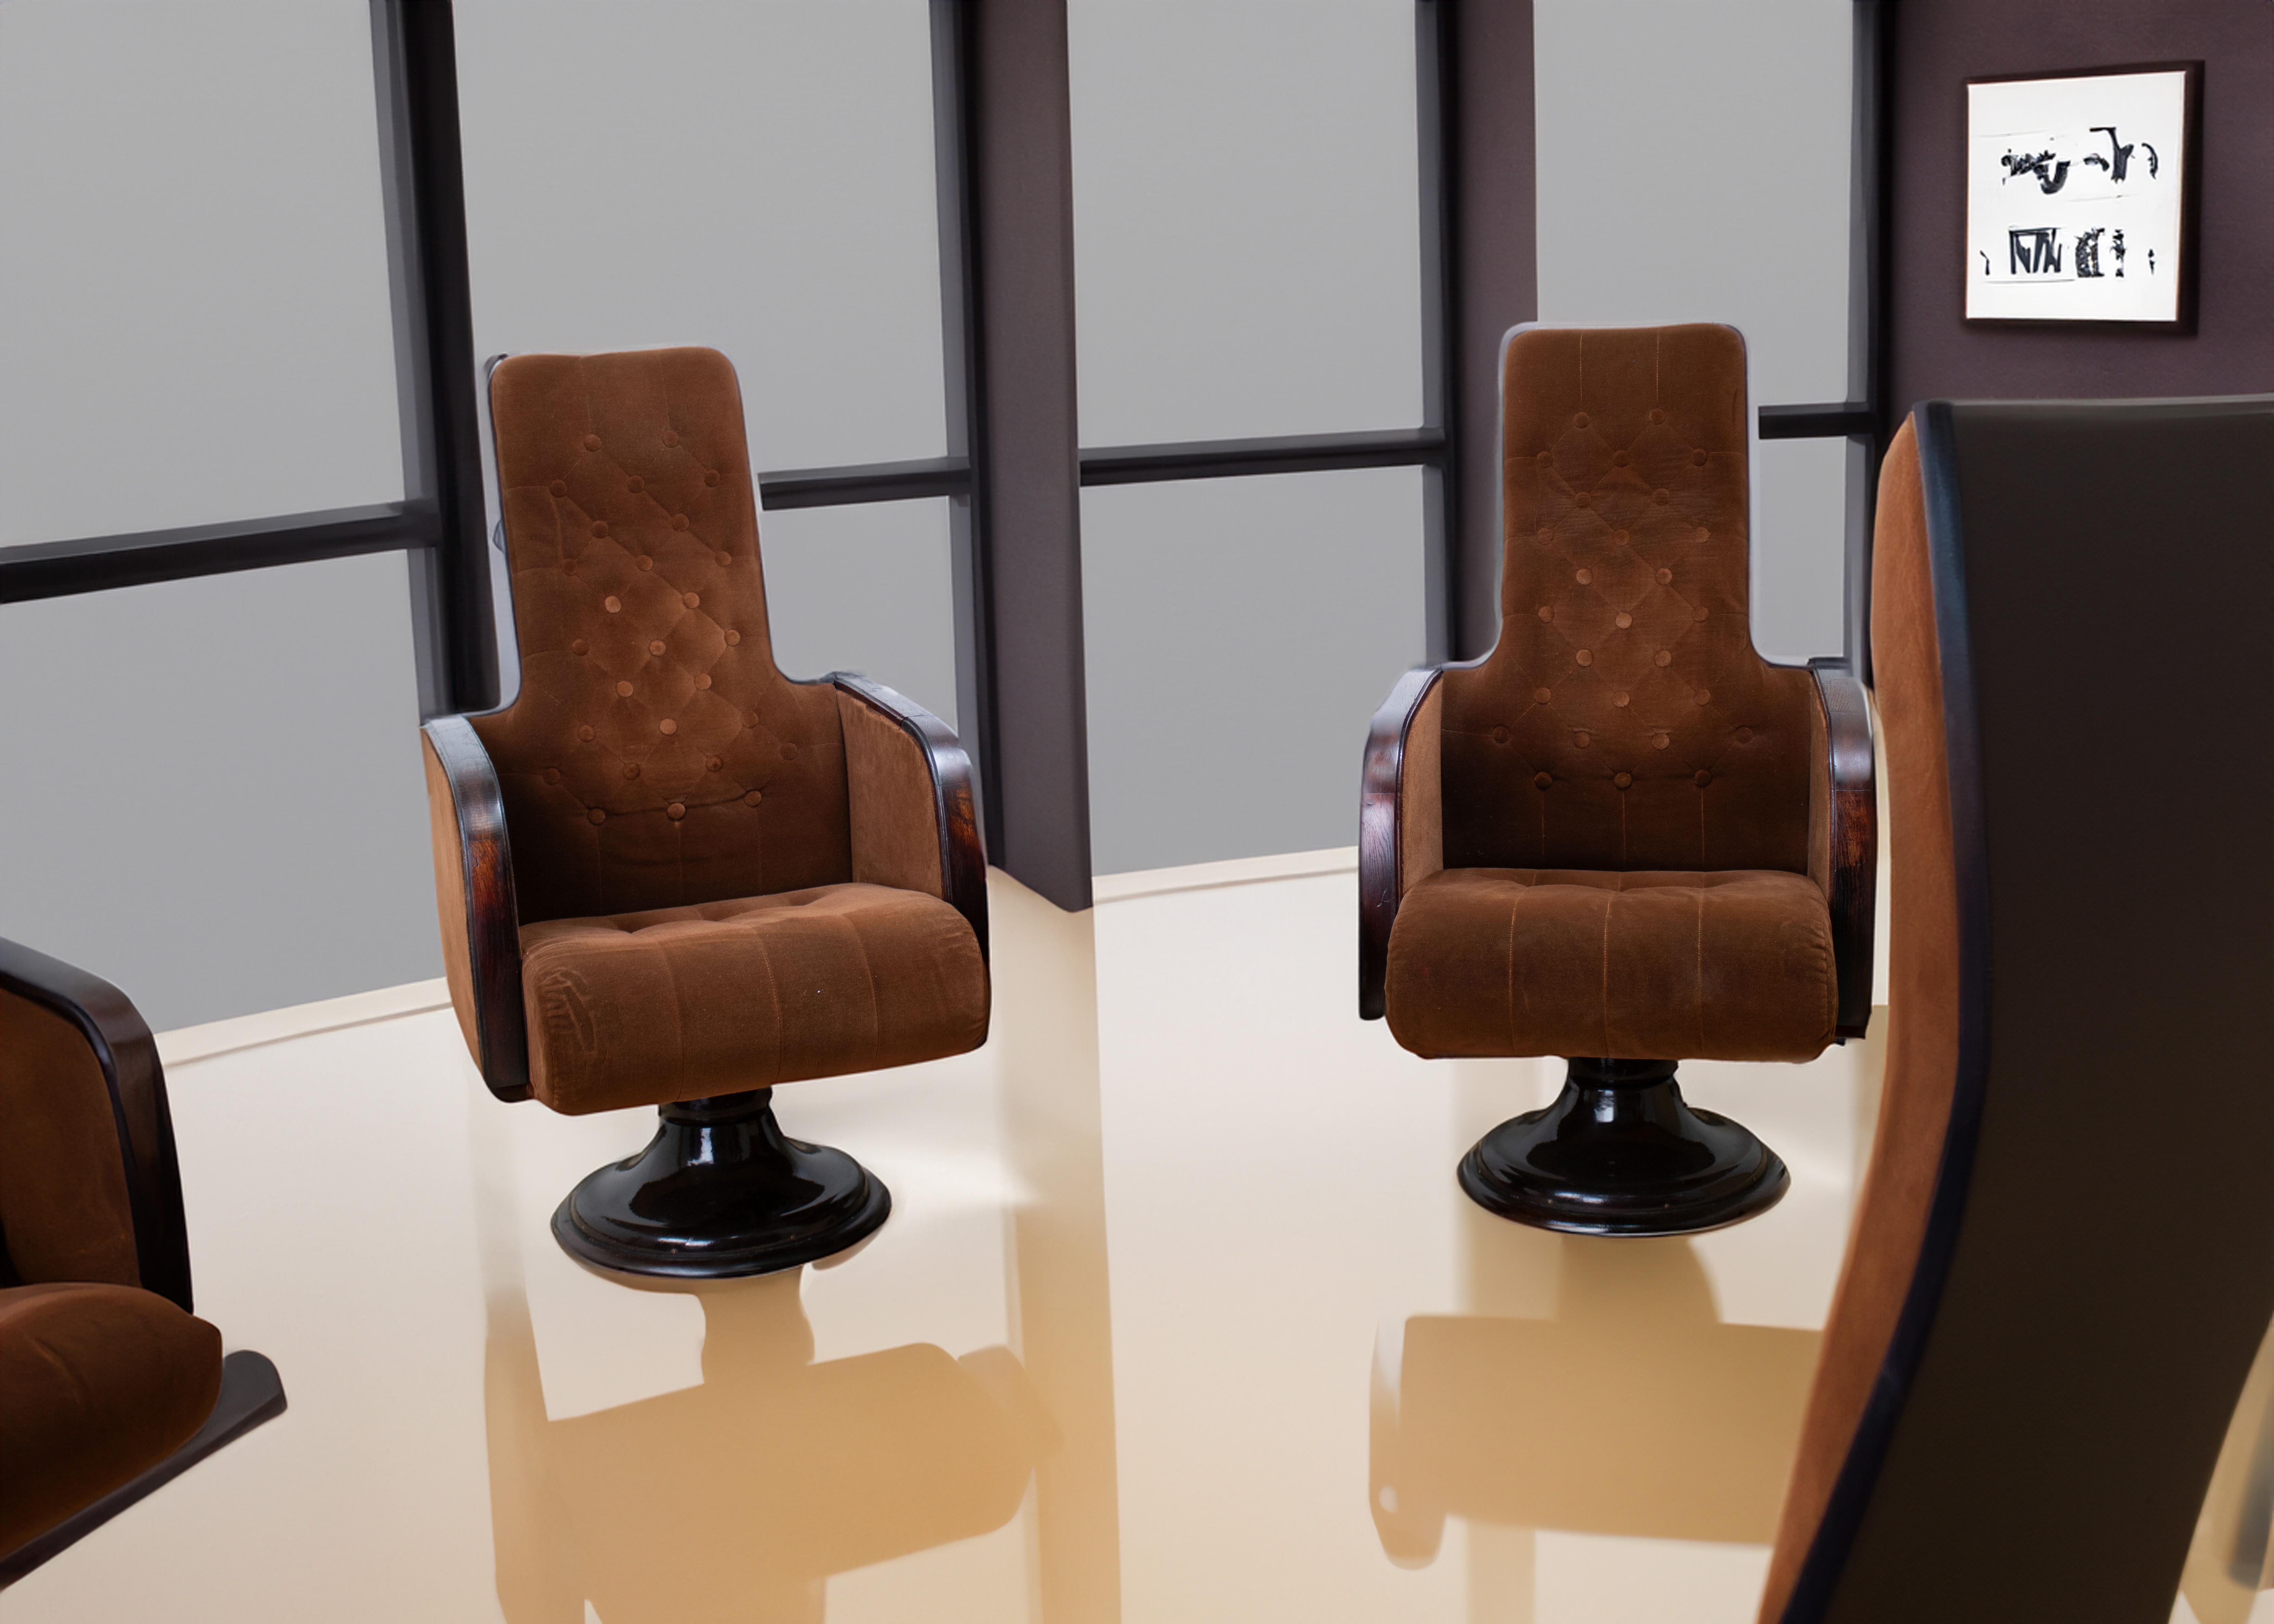 This chairs were used for conferences, the interepreter equipment is contained in the back of the chair and in one of the arms. As far as we know,  these 2 are the only remaining chairs from a set of more than twenty.